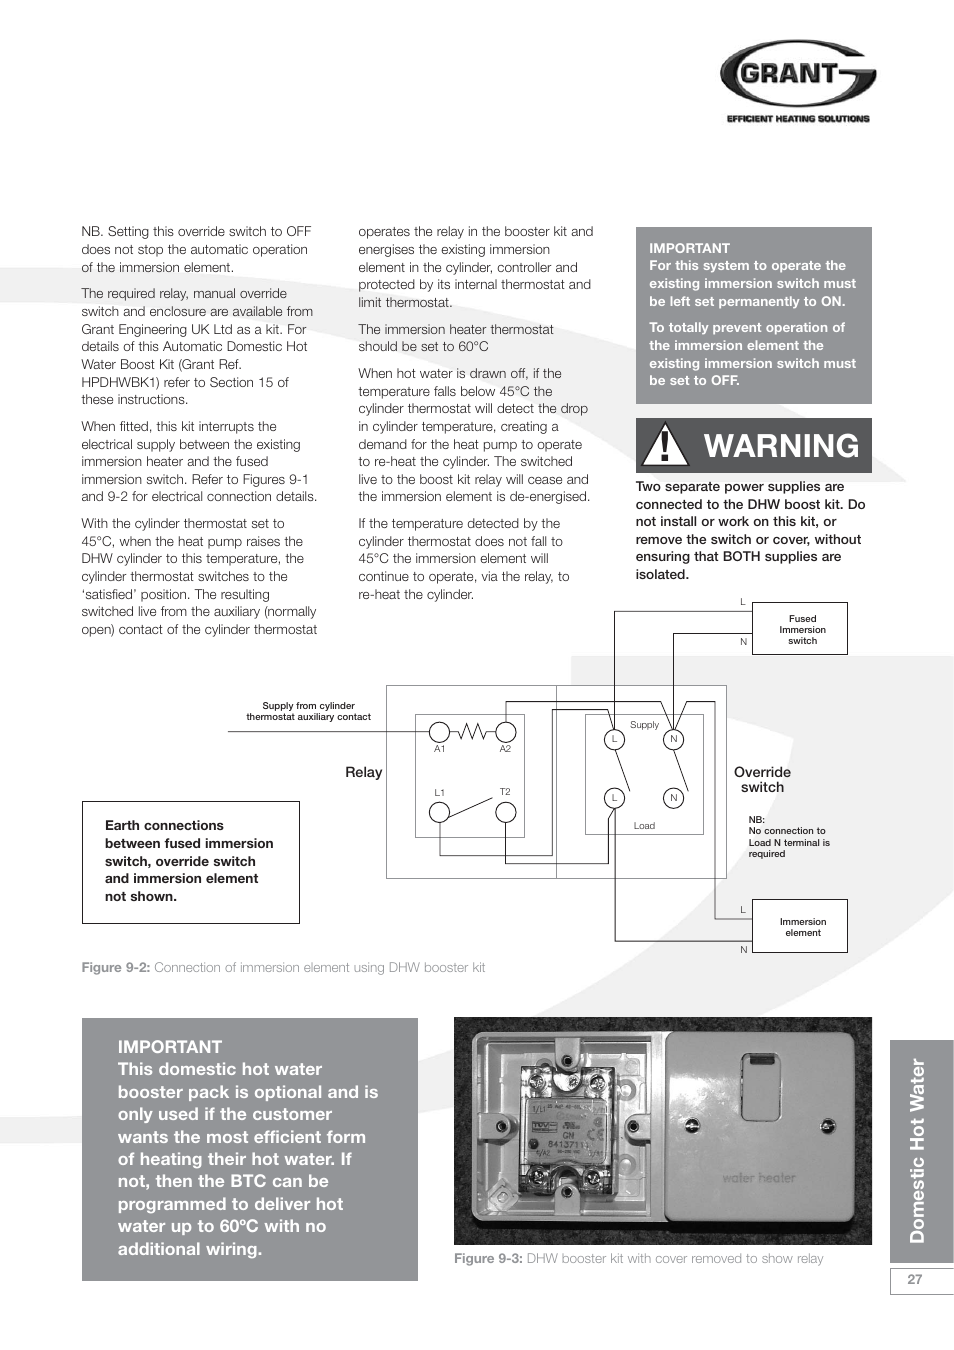 Warning, Domestic hot w a ter | Grant Products HPAW155 User Manual | Page 31 / 50